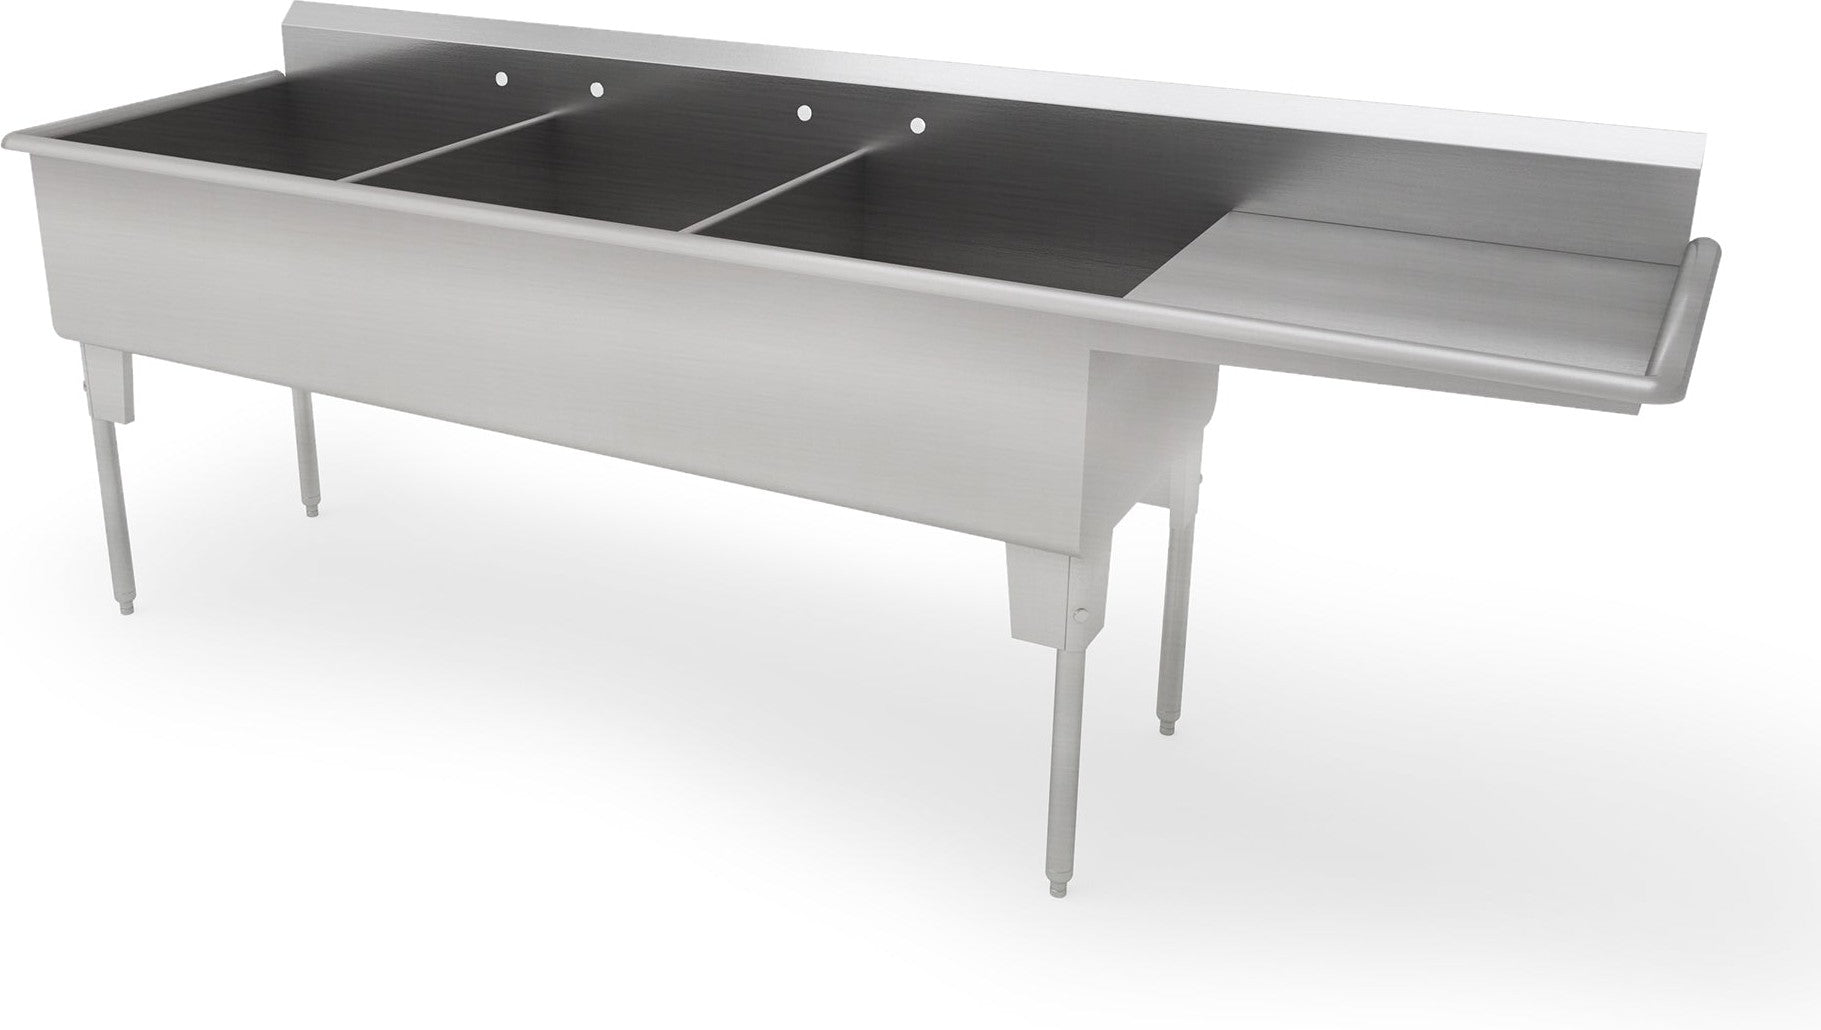 Franesse - 24" x 20" x 14" Triple Compartment Sink With Drainboard - T2460-14-DBR24-O